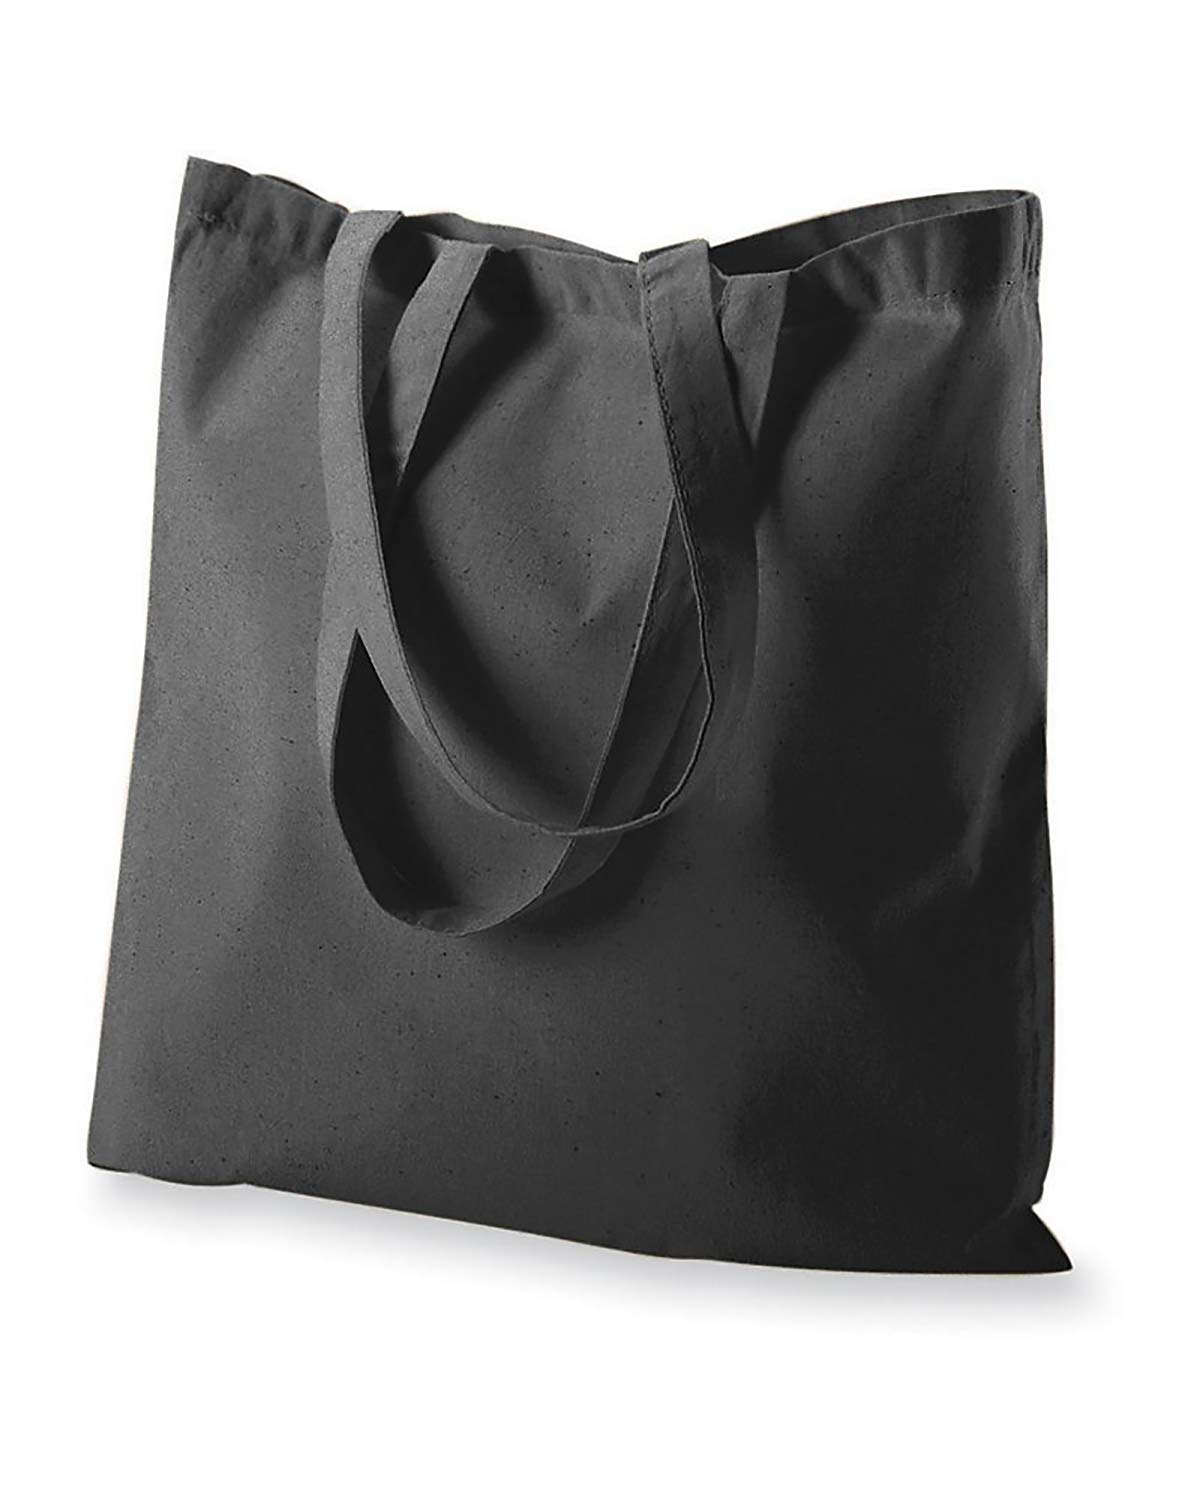 'Augusta 825 Budget Tote'